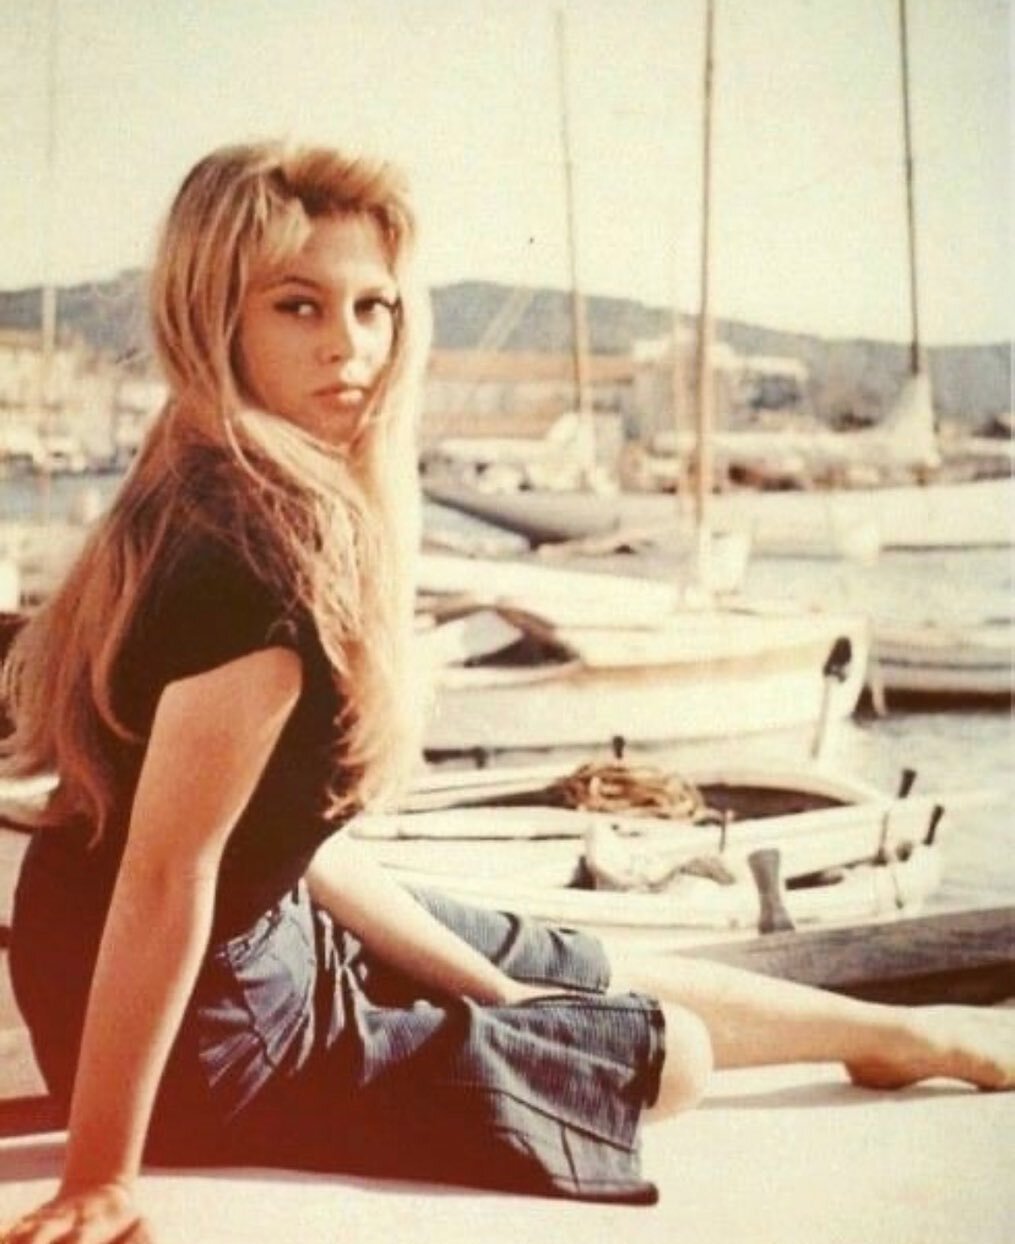 #mondaymuse 🌼
&lsquo;And God Created Woman&rsquo;, 1956
.. BB, always the perfect summer muse
.
.
#bb #brigittebardot #summermuse